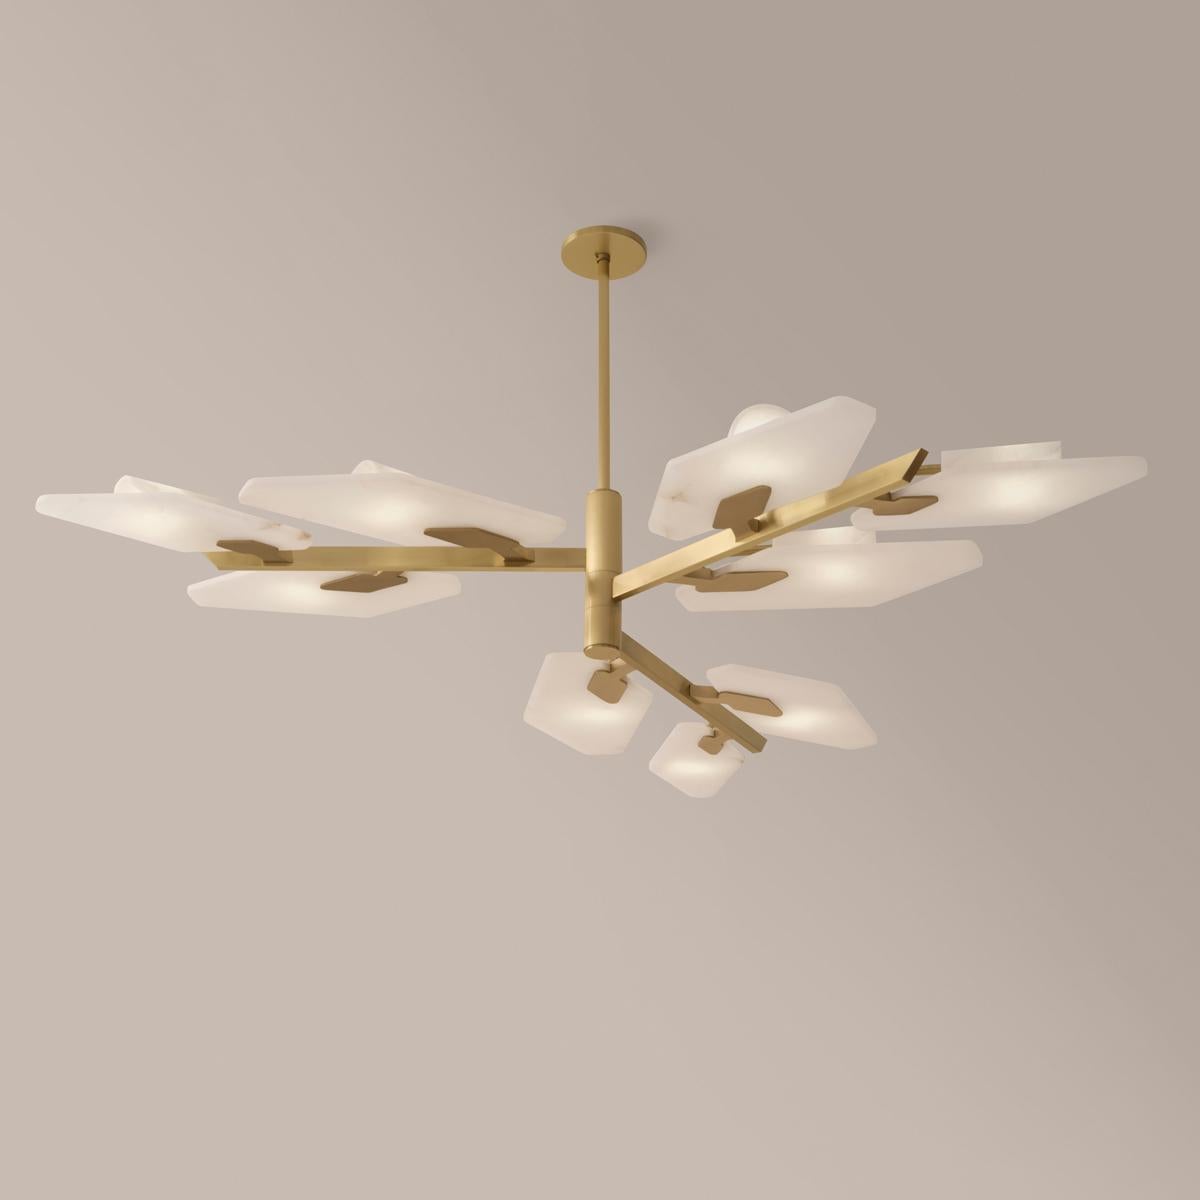 The Leaf ceiling light recalls nature with its branching arms and Tuscan alabaster “leaves” giving it a distinctive modern organic look.

Shown in the primary images in satin brass-subsequent pictures show the fixture in Bronzo Ottone.

Starting at